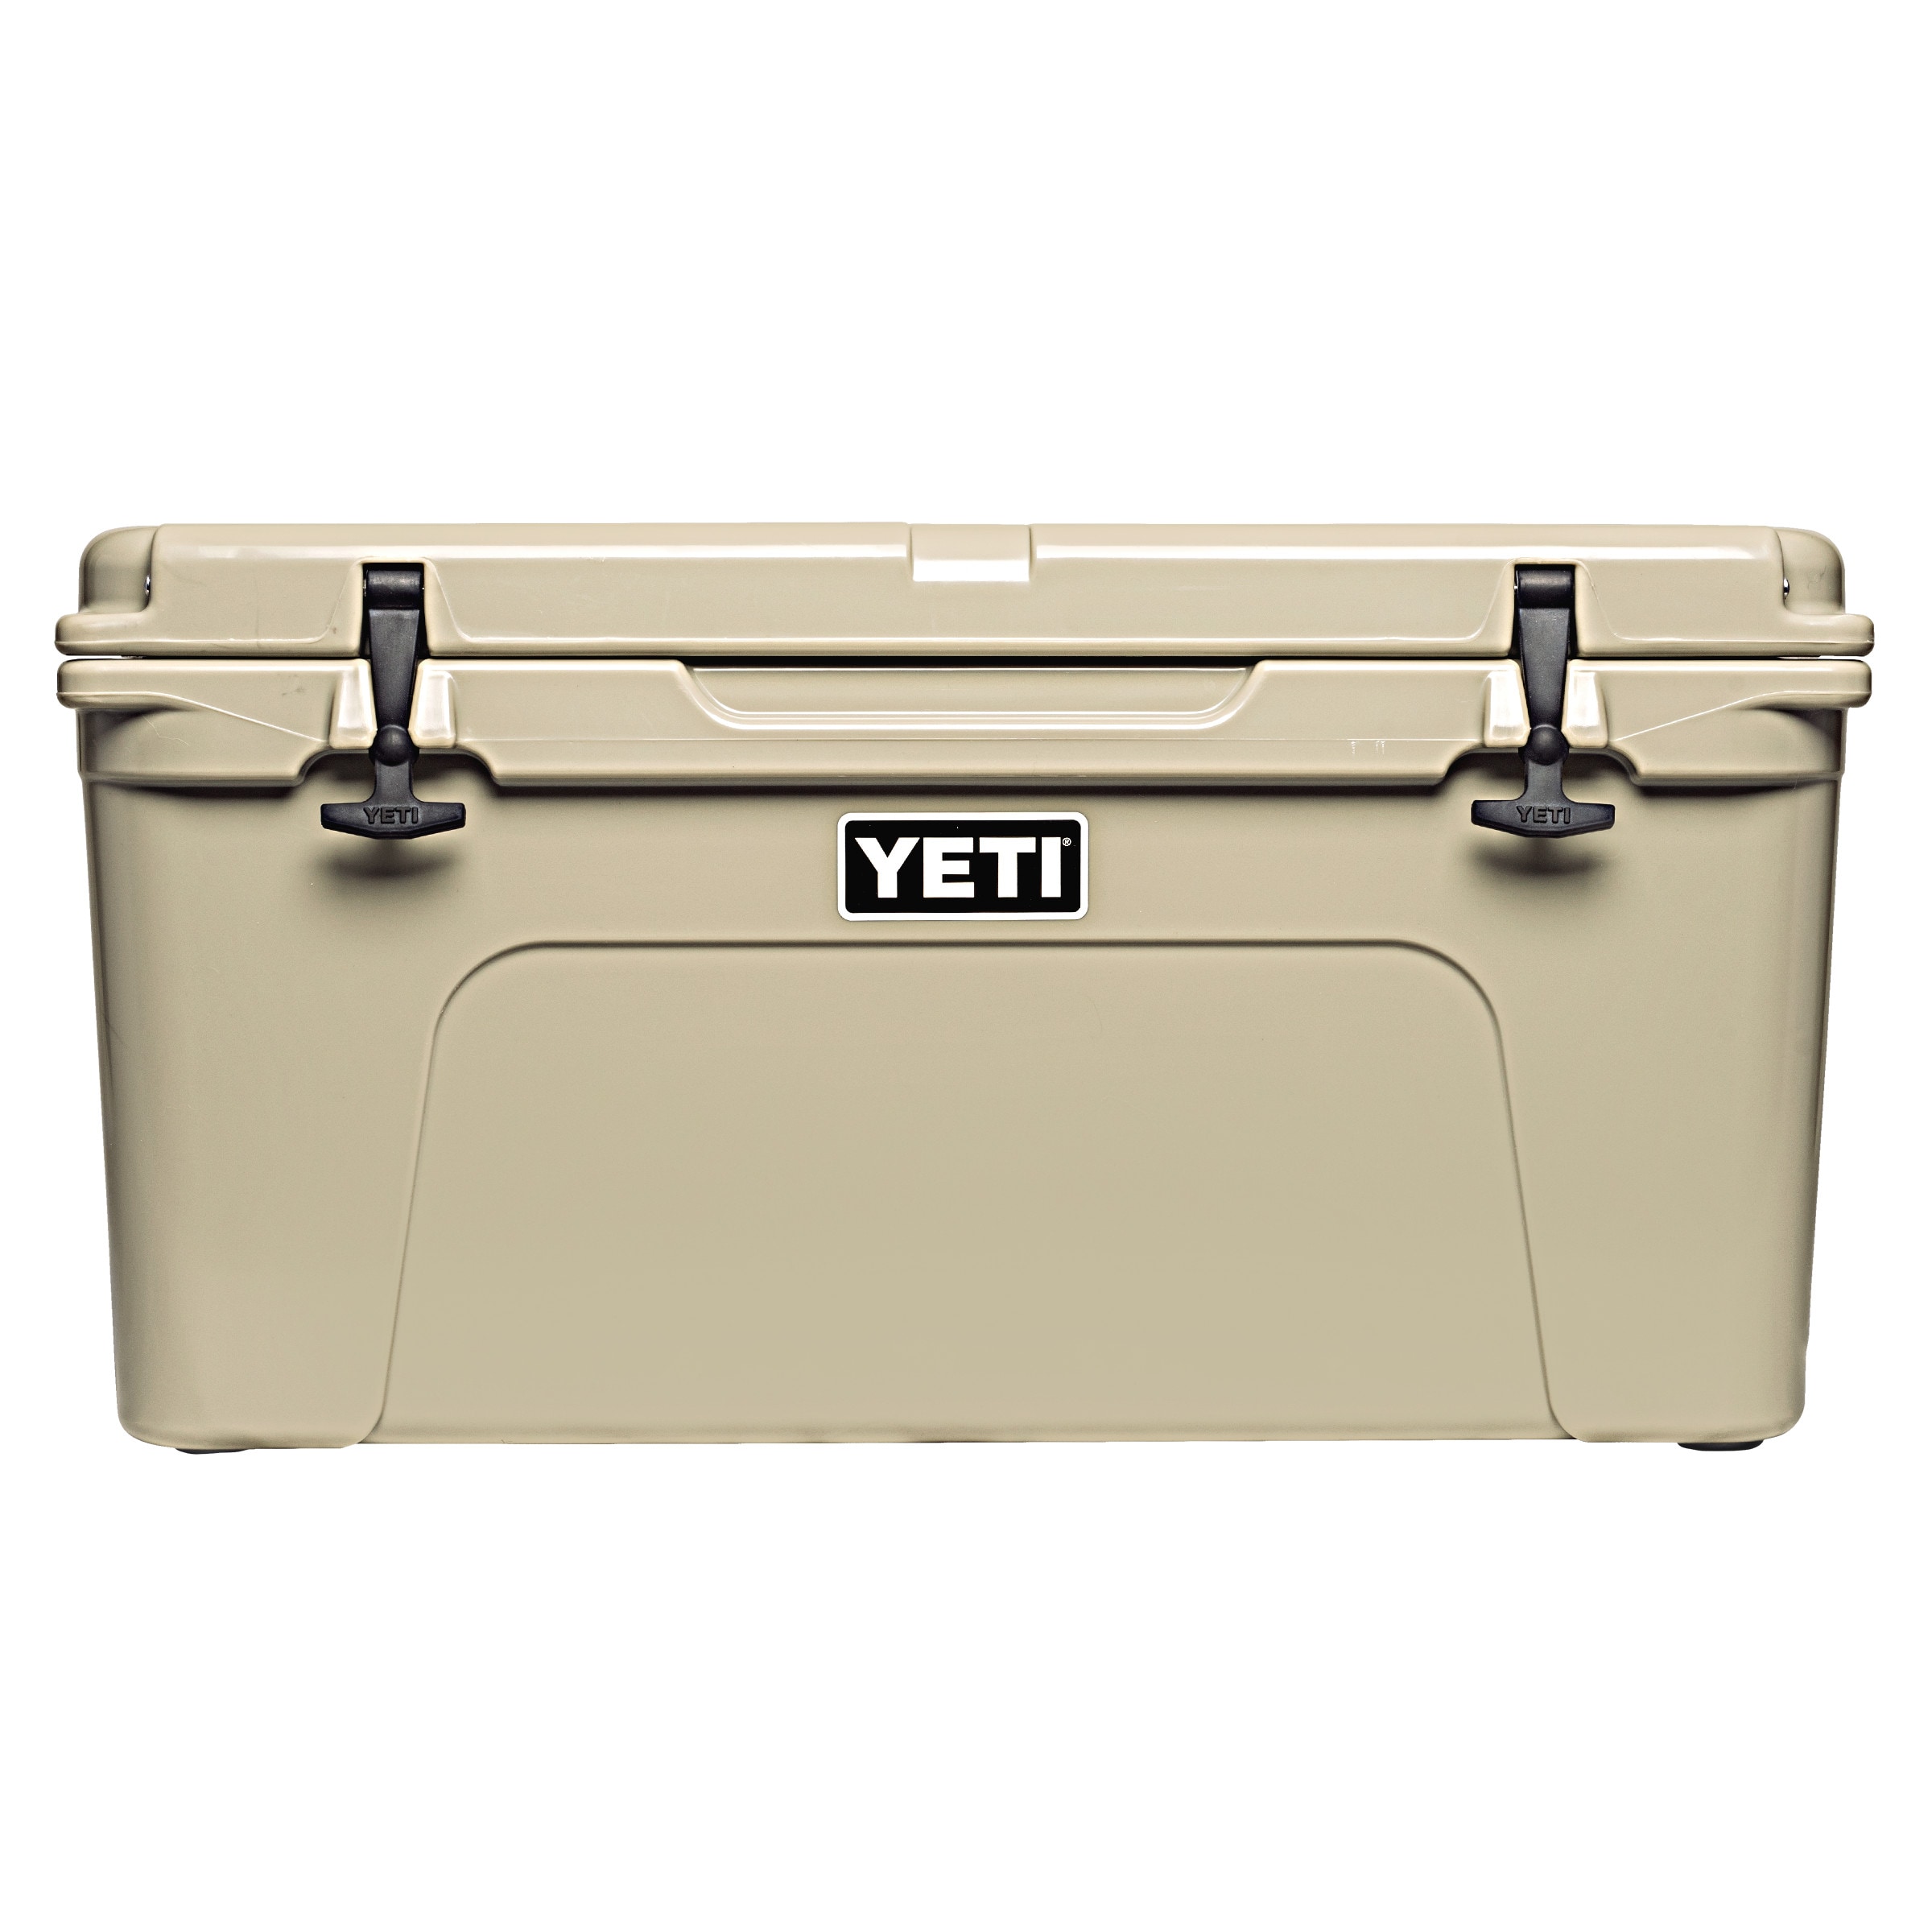 YETI Tundra 65 Insulated Chest Cooler, Tan at Lowes.com